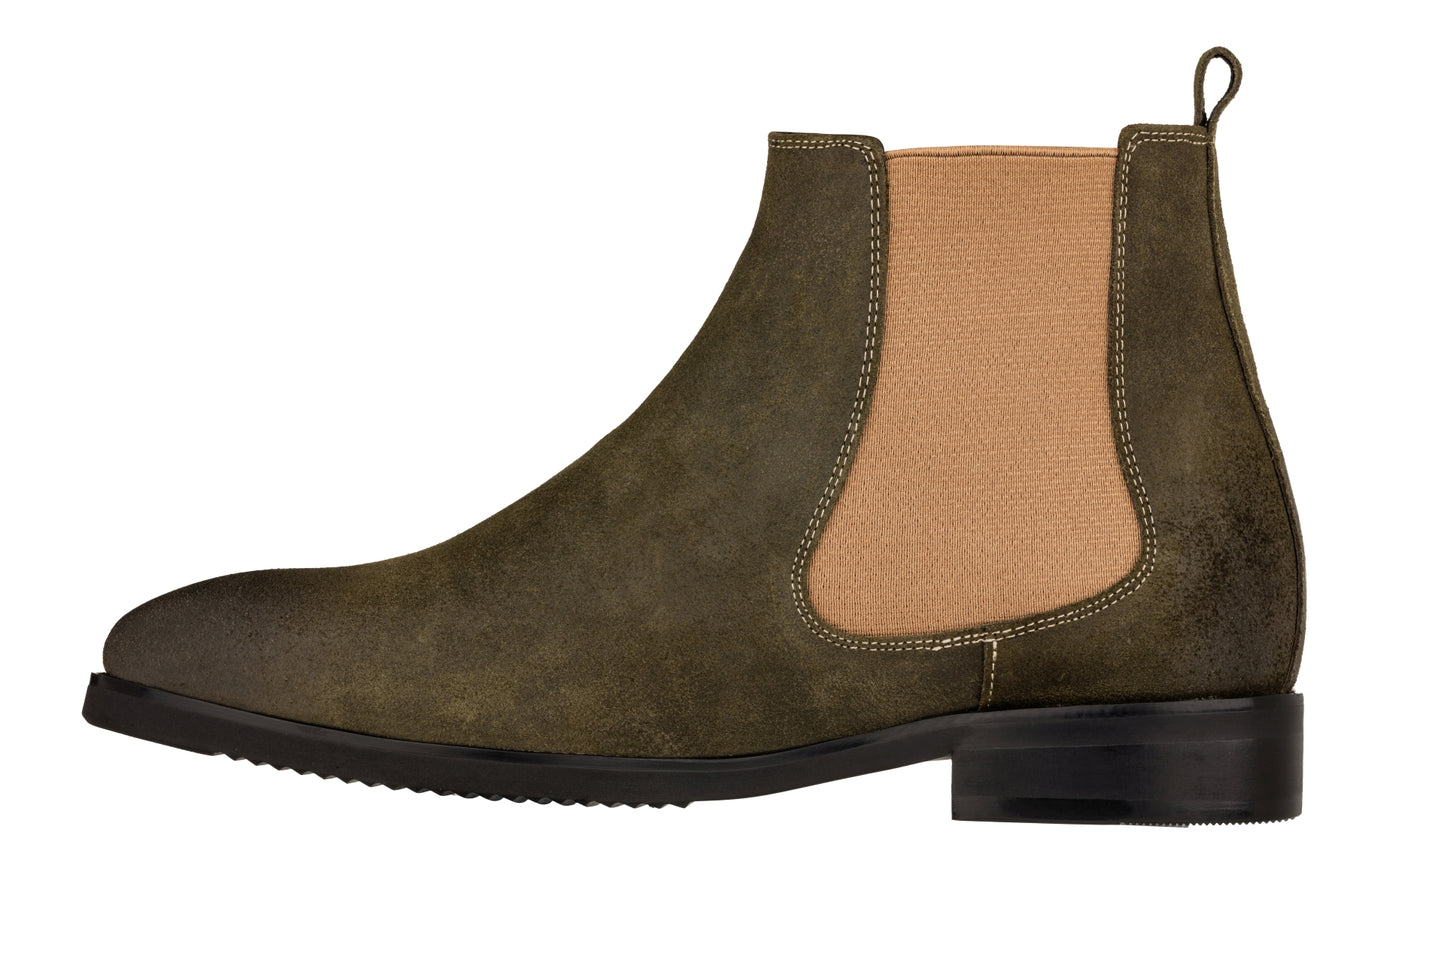 Elevator shoes height increase TOTO - K92082 - 3.0 Inches Taller (Nubuck Army Green) - Chelsea Ankle Boots